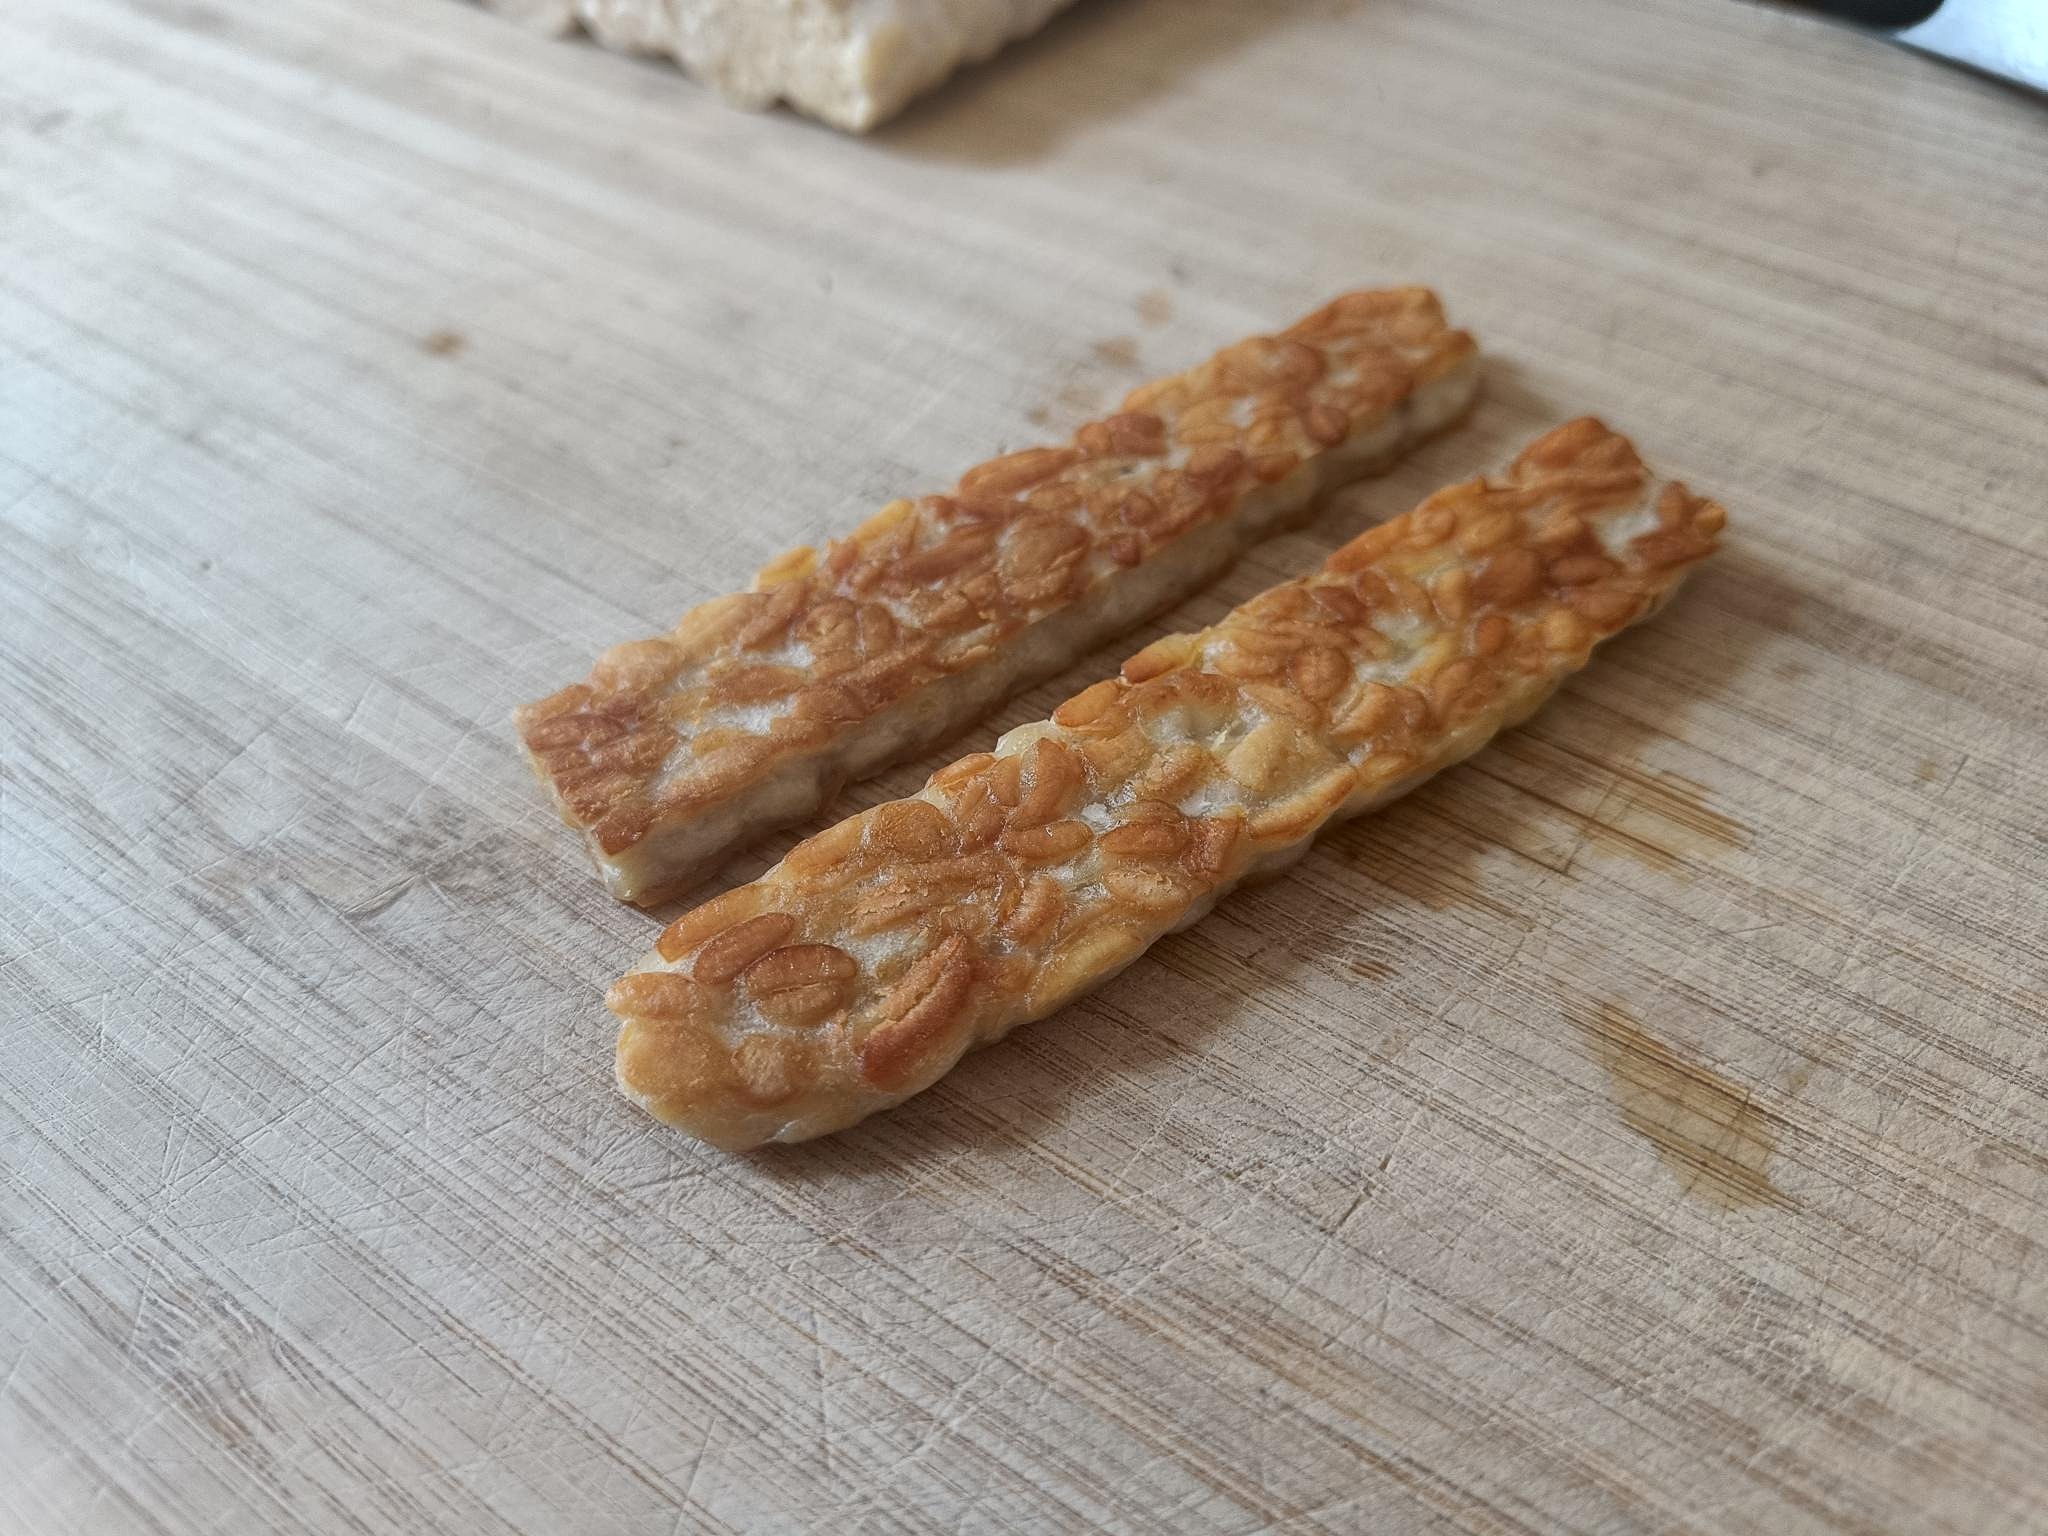 immaculate fried strips of tempeh